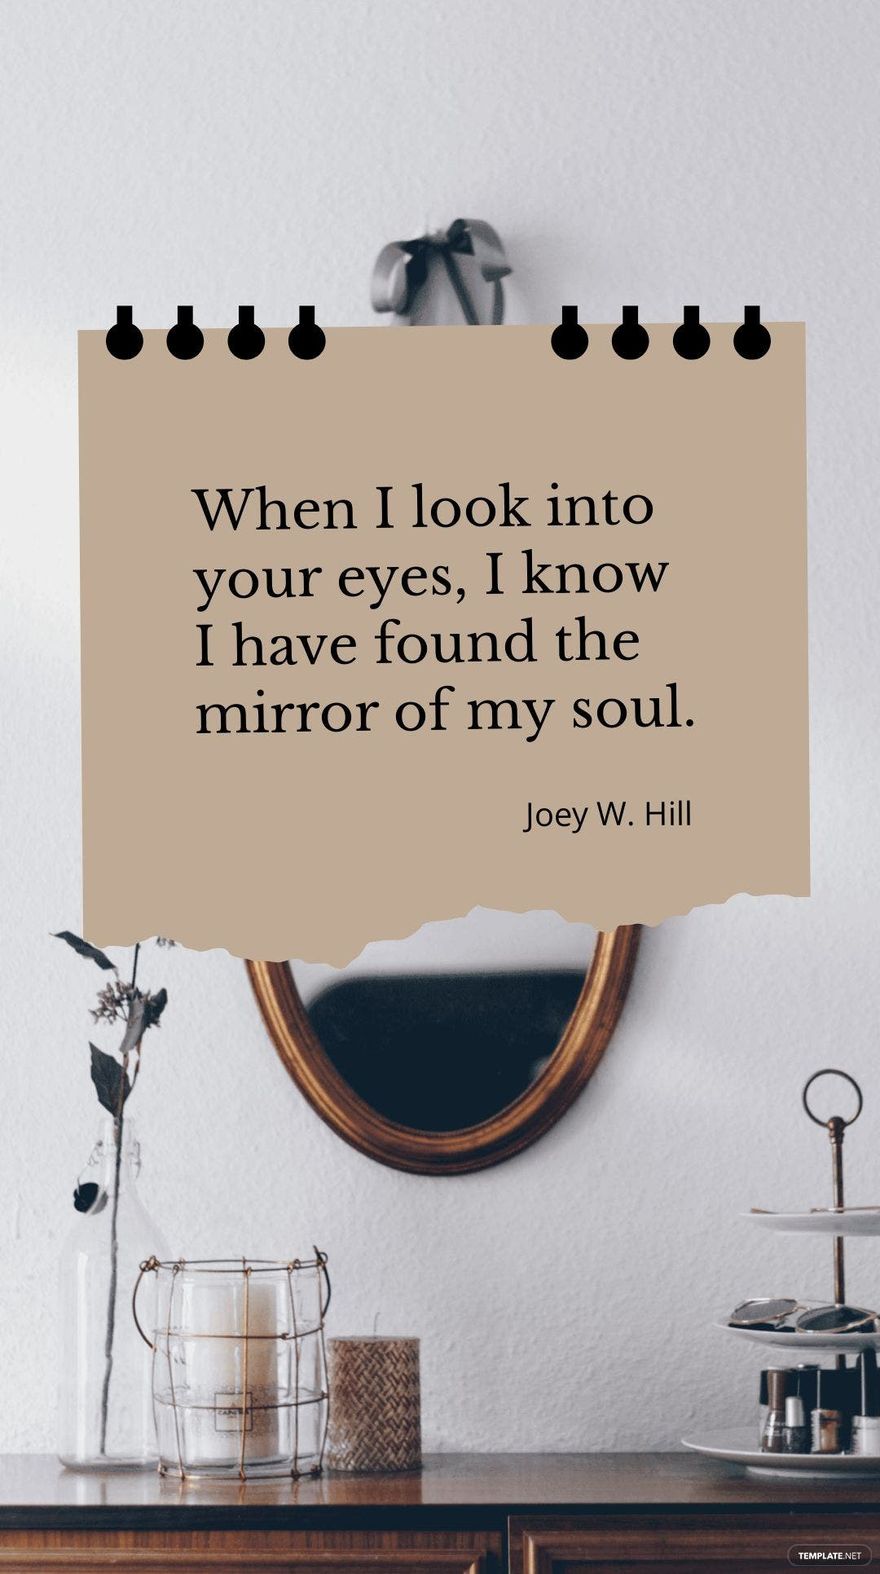 Joey W. Hill - “When I look into your eyes, I know I have found the mirror of my soul.”